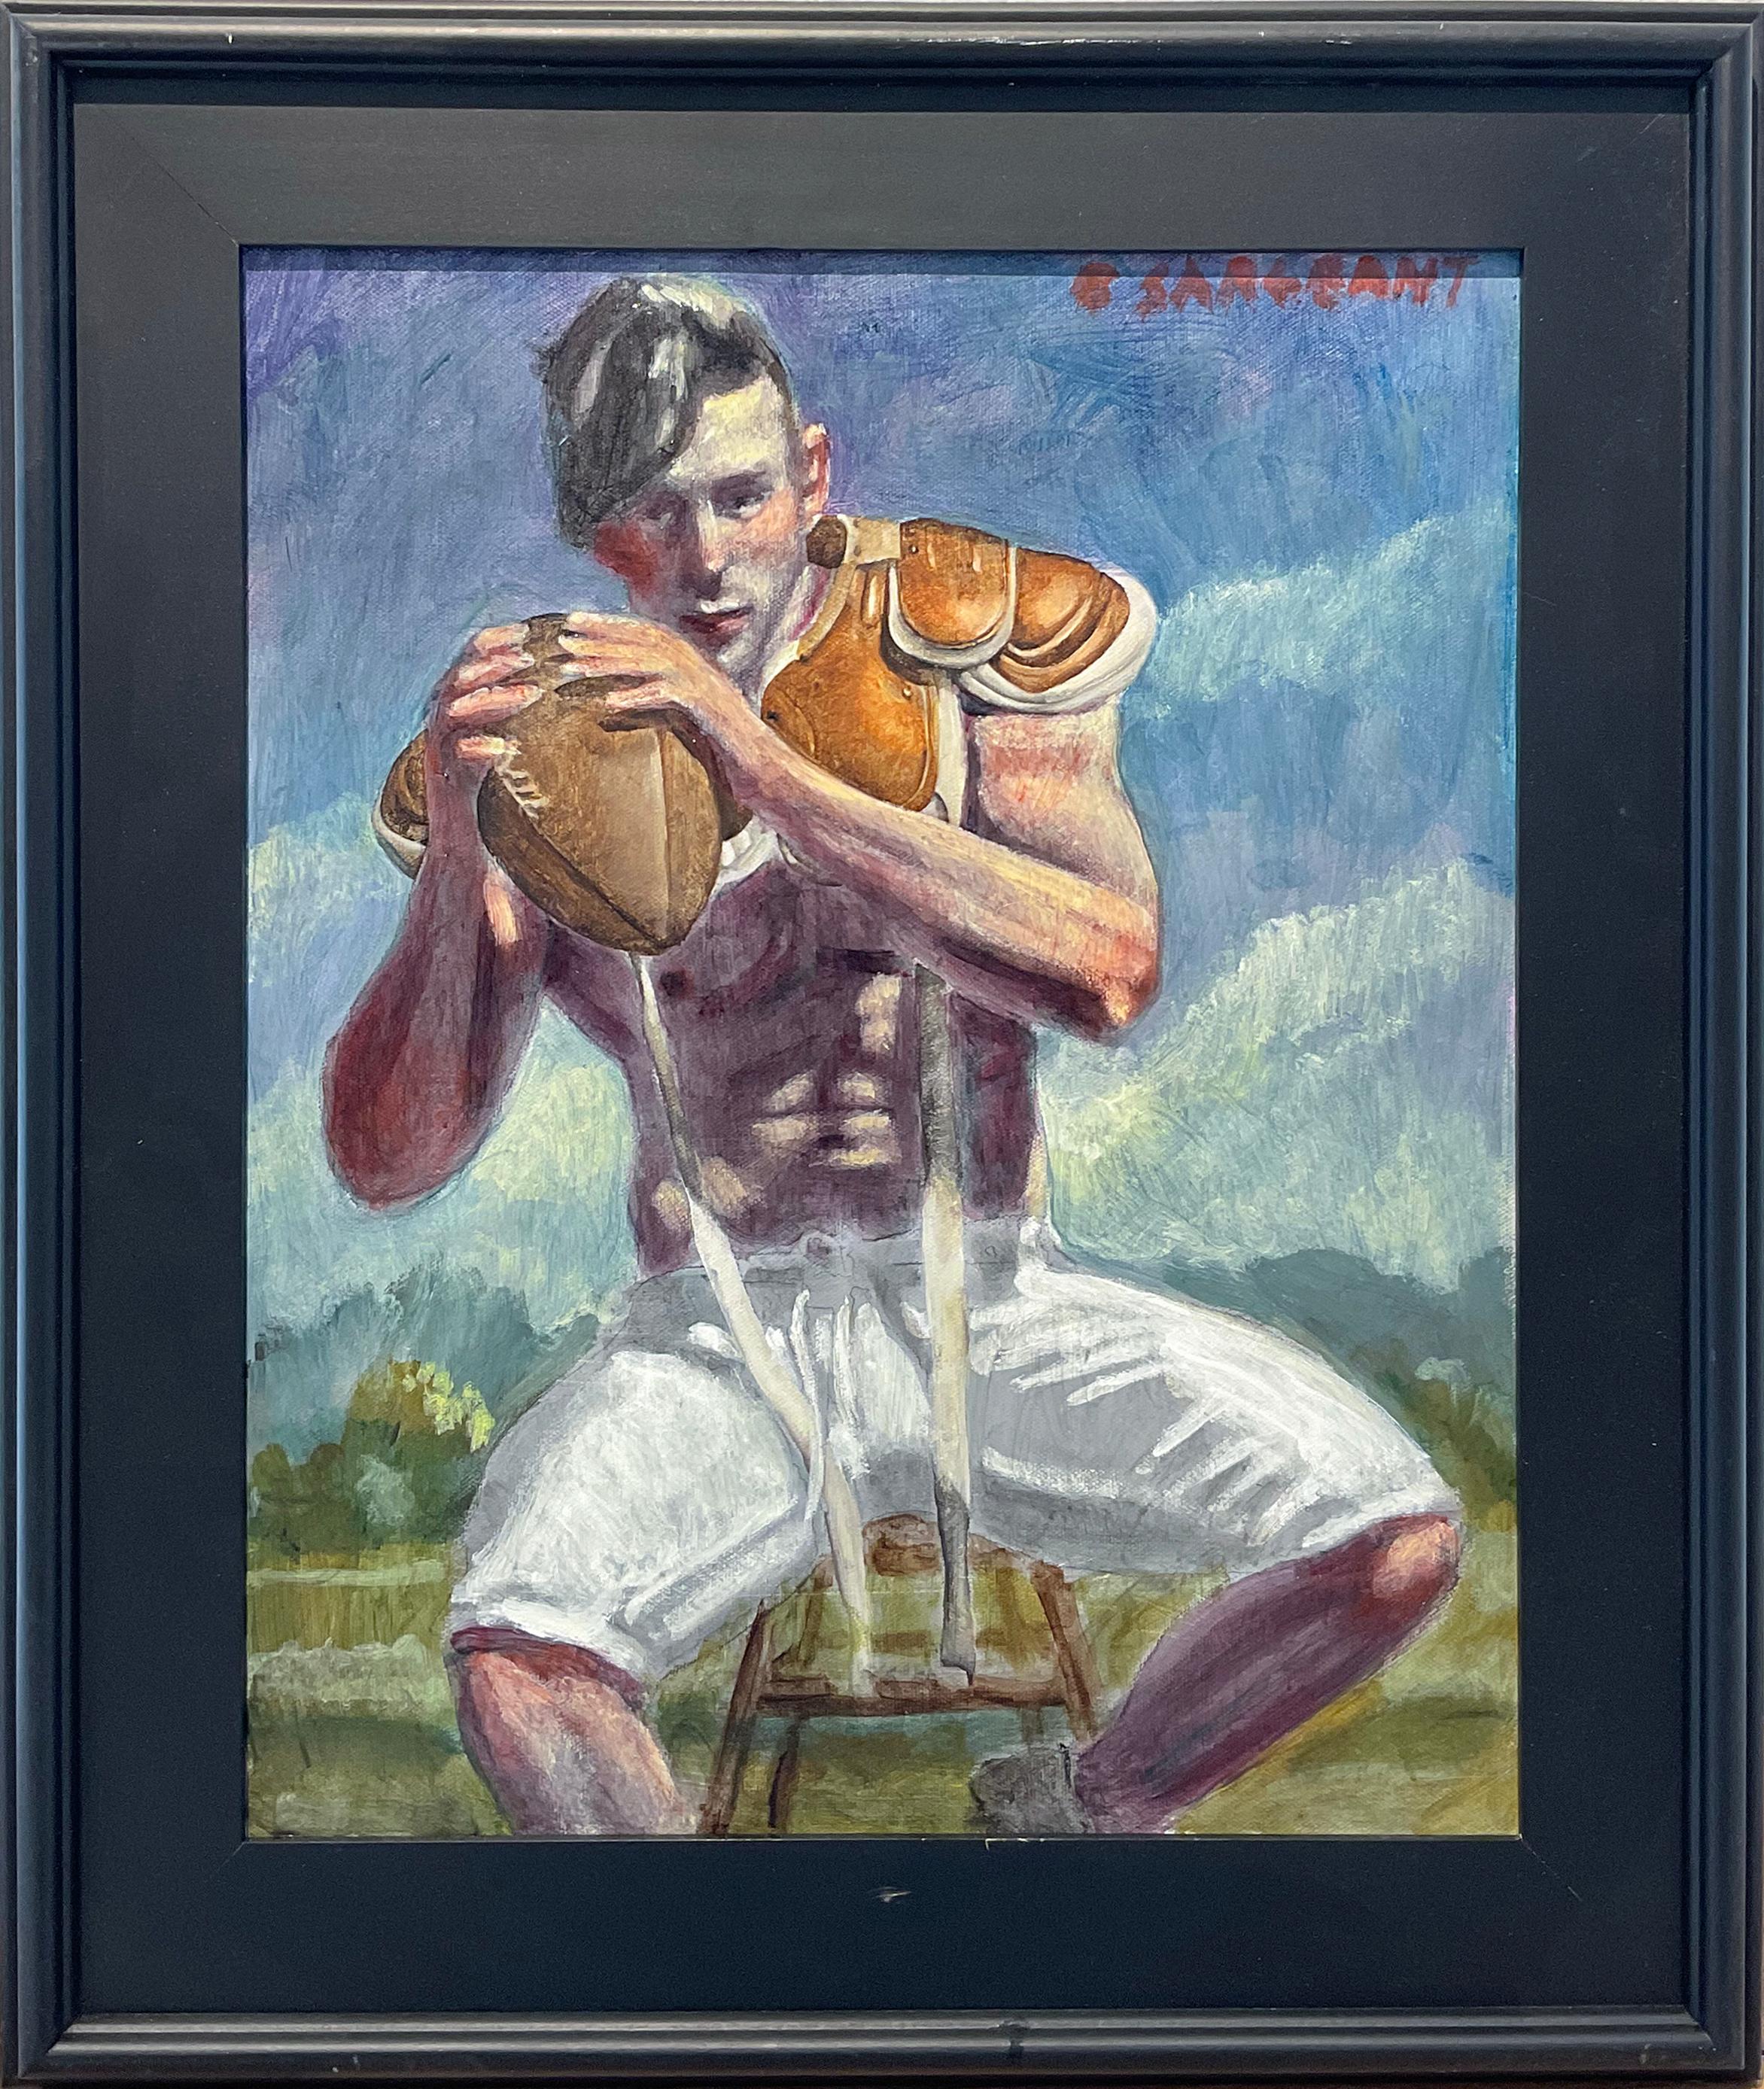 Ready to Play (Academic Figurative Painting of Male Athlete by Mark Beard) 